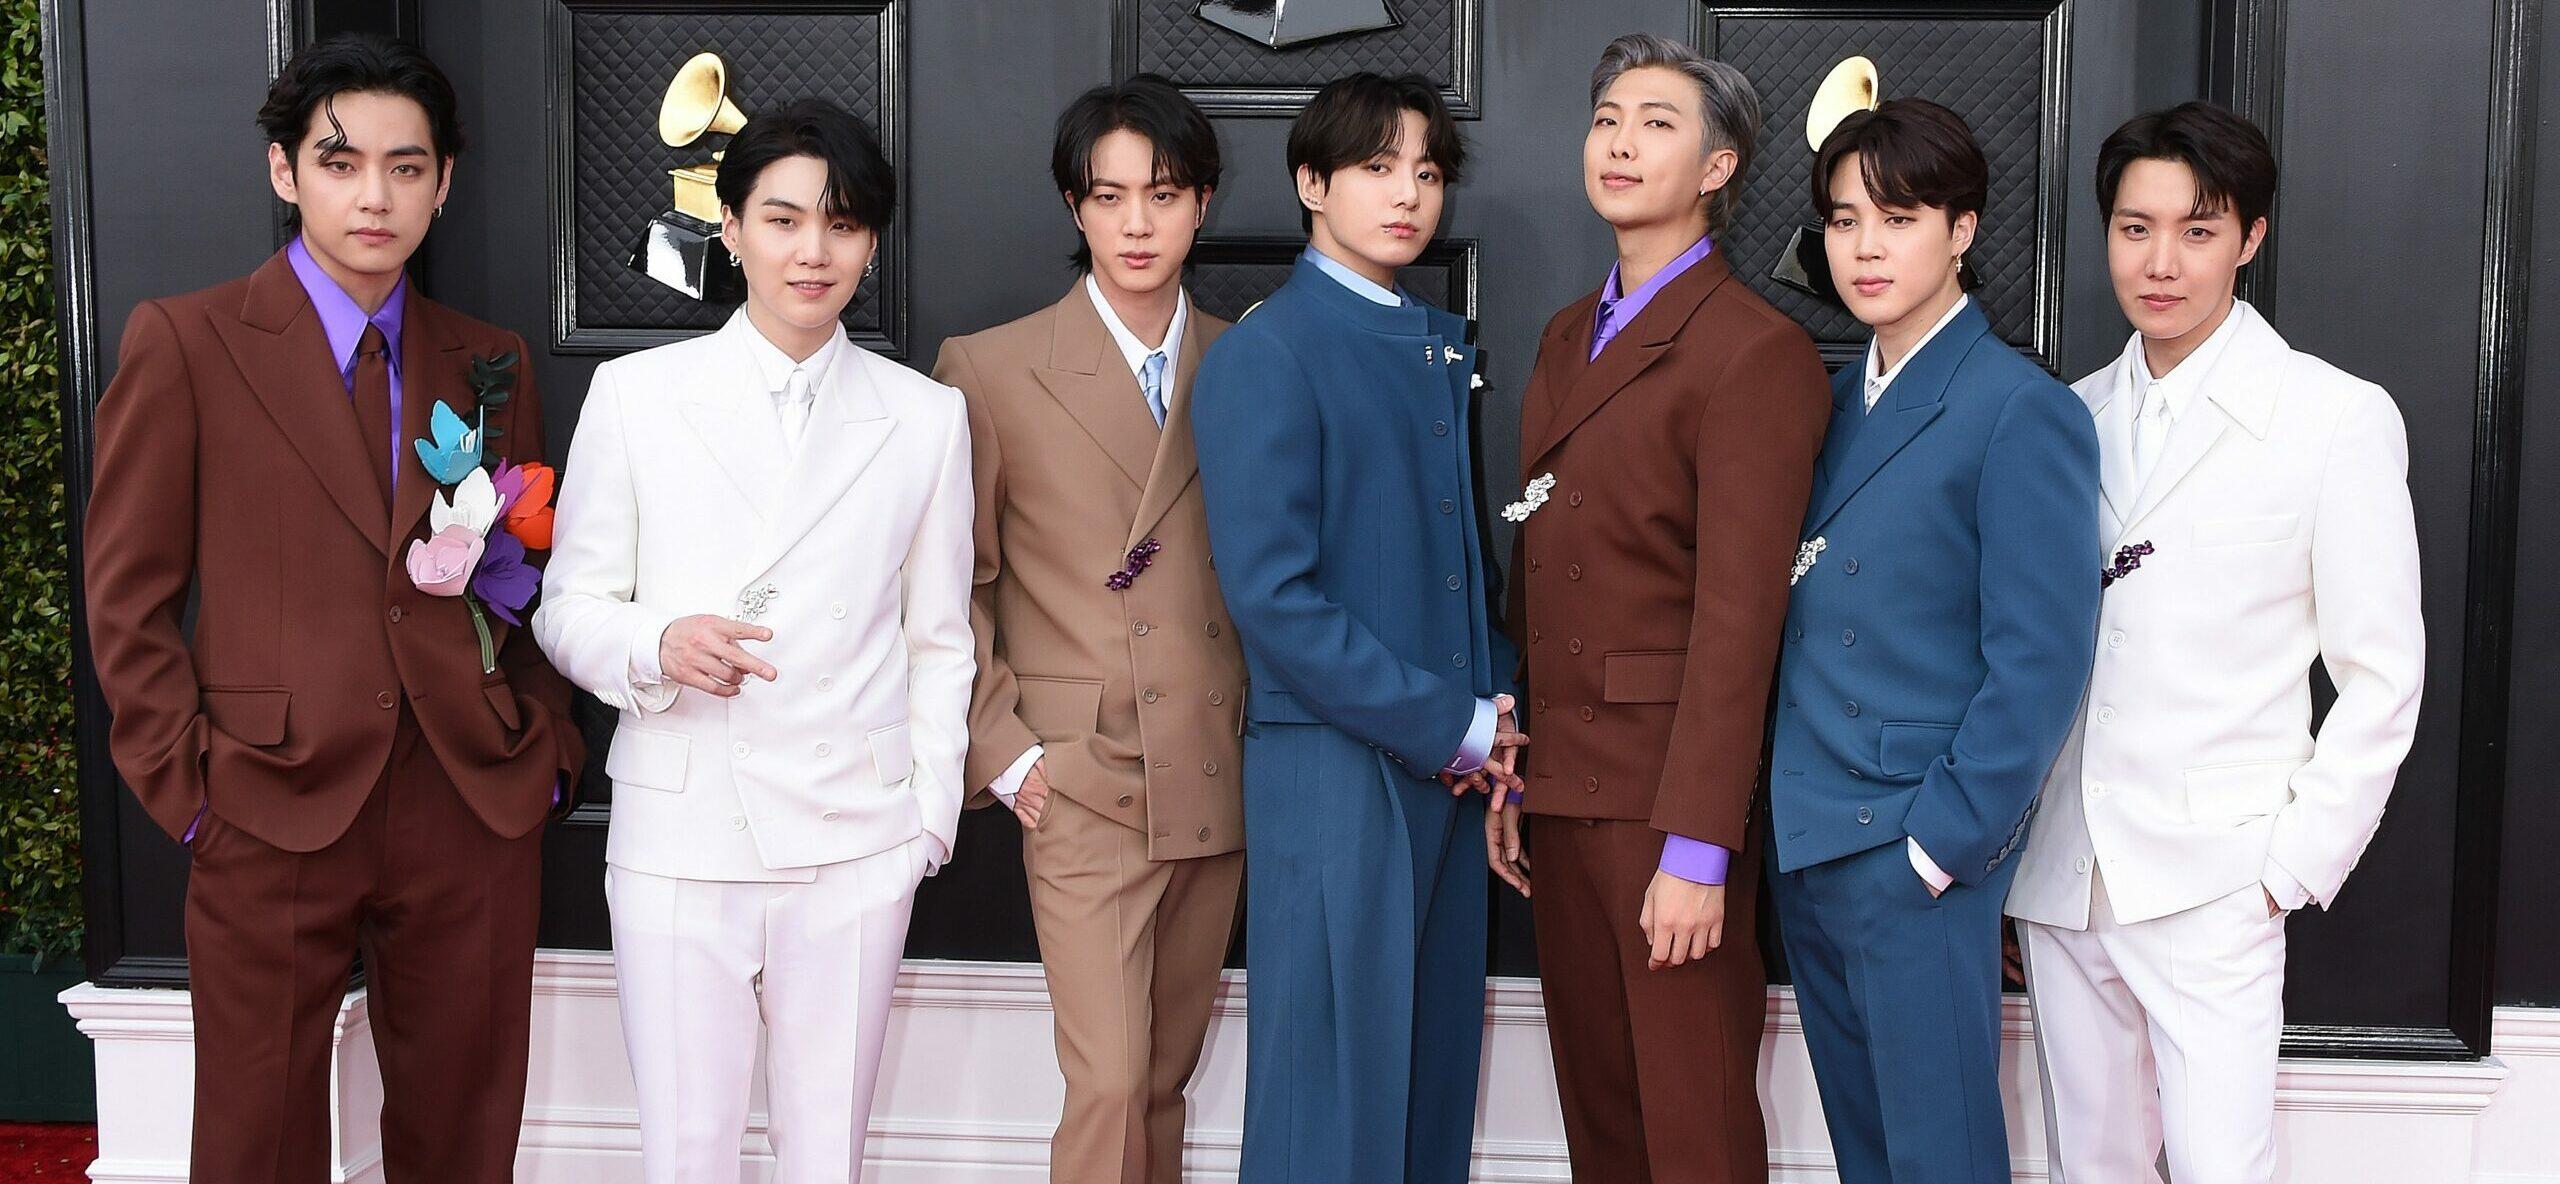 All Of BTS Members Have Reported For Mandatory Military Service